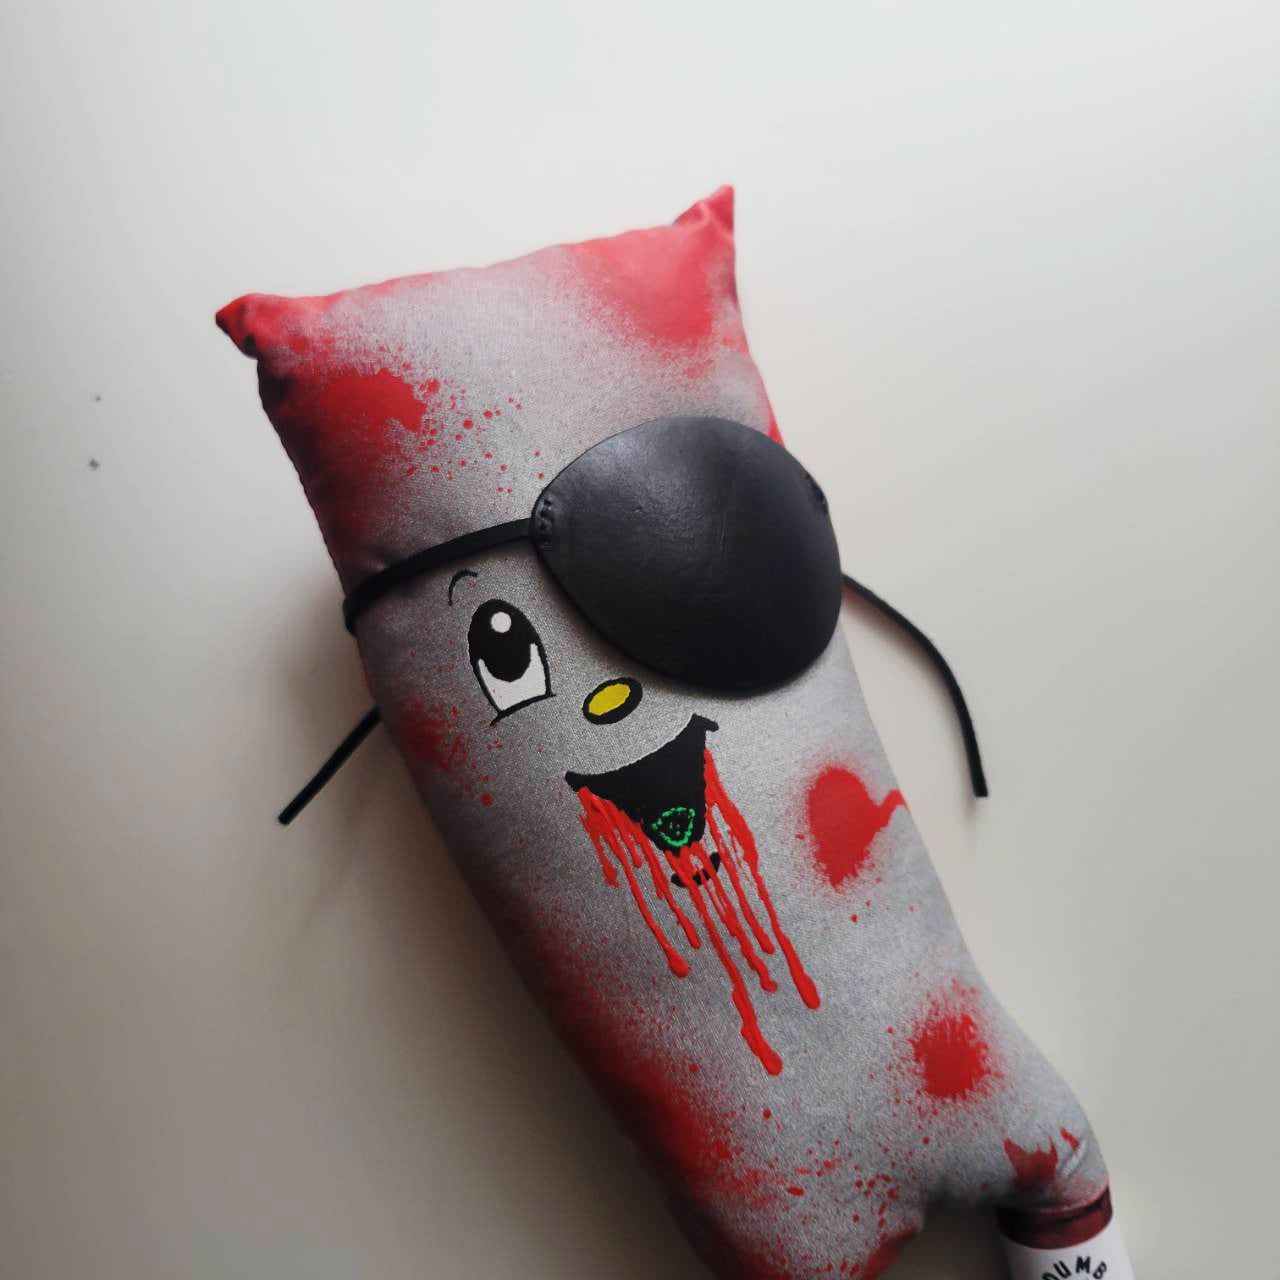 ||||| Dumb Friends "Eye Patched Chinese KNIFE MAN" PLUSH TOY